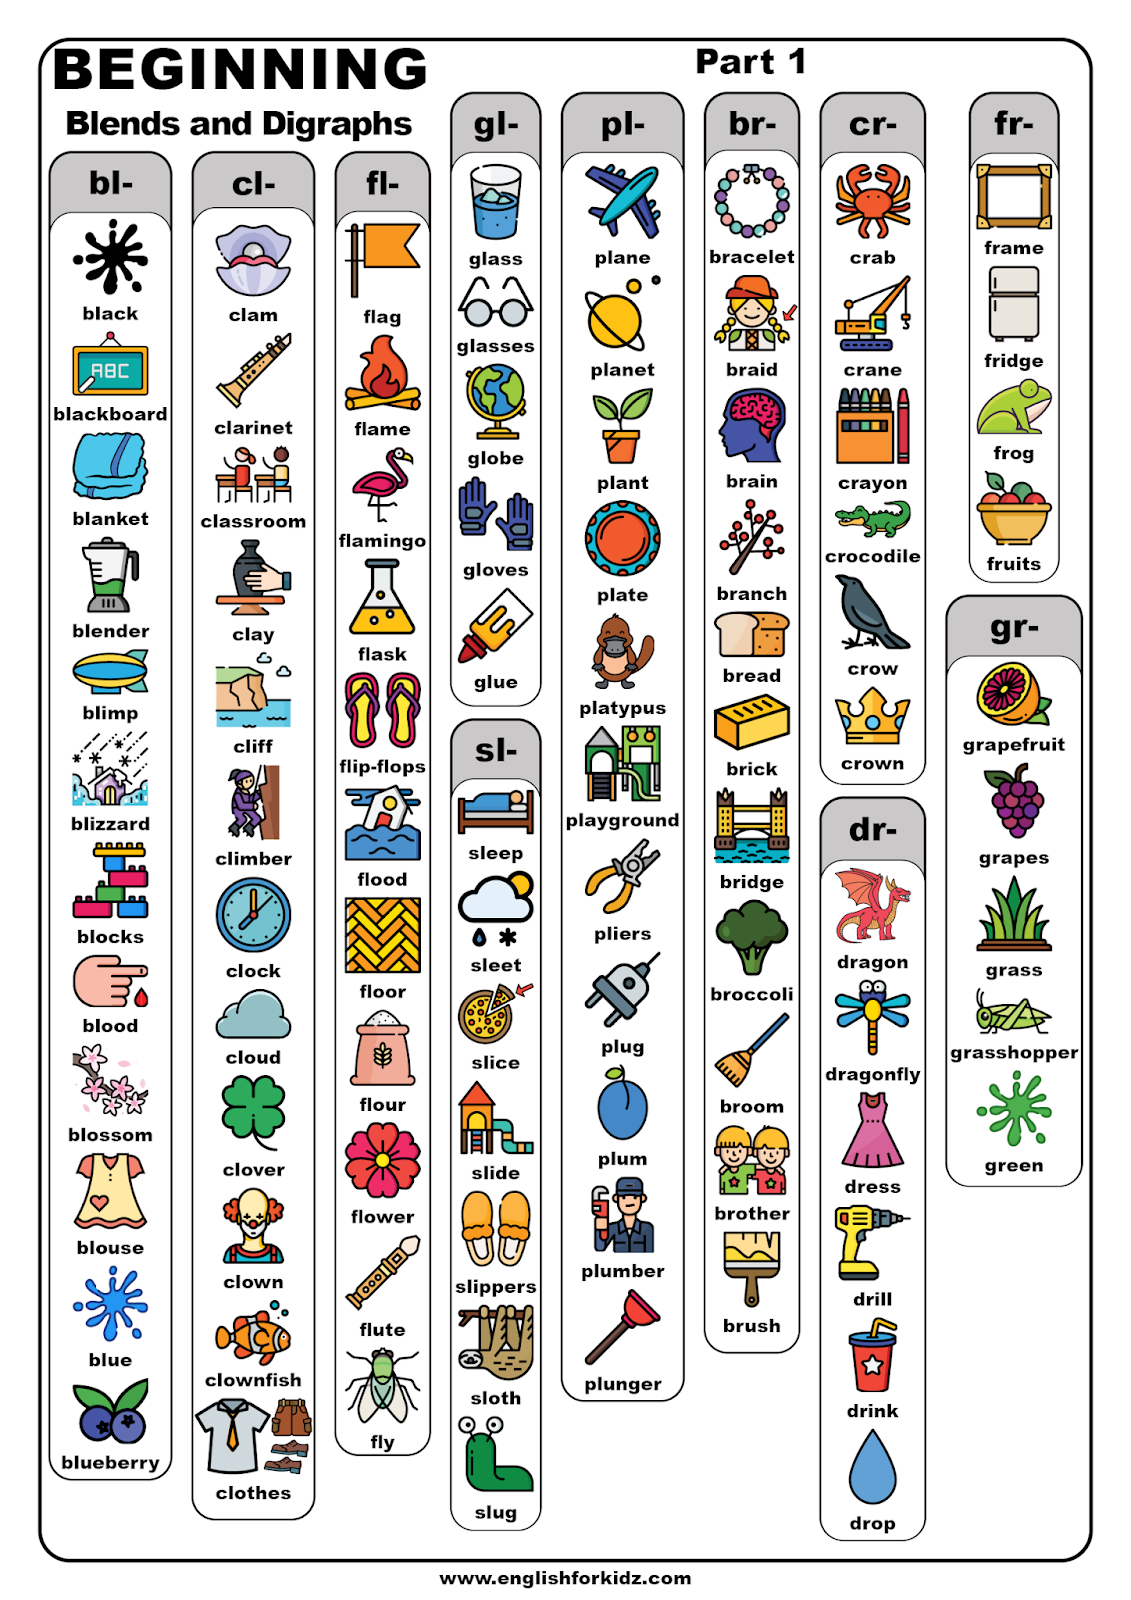 consonant-blends-chart-and-worksheets-beginning-consonant-blends-and